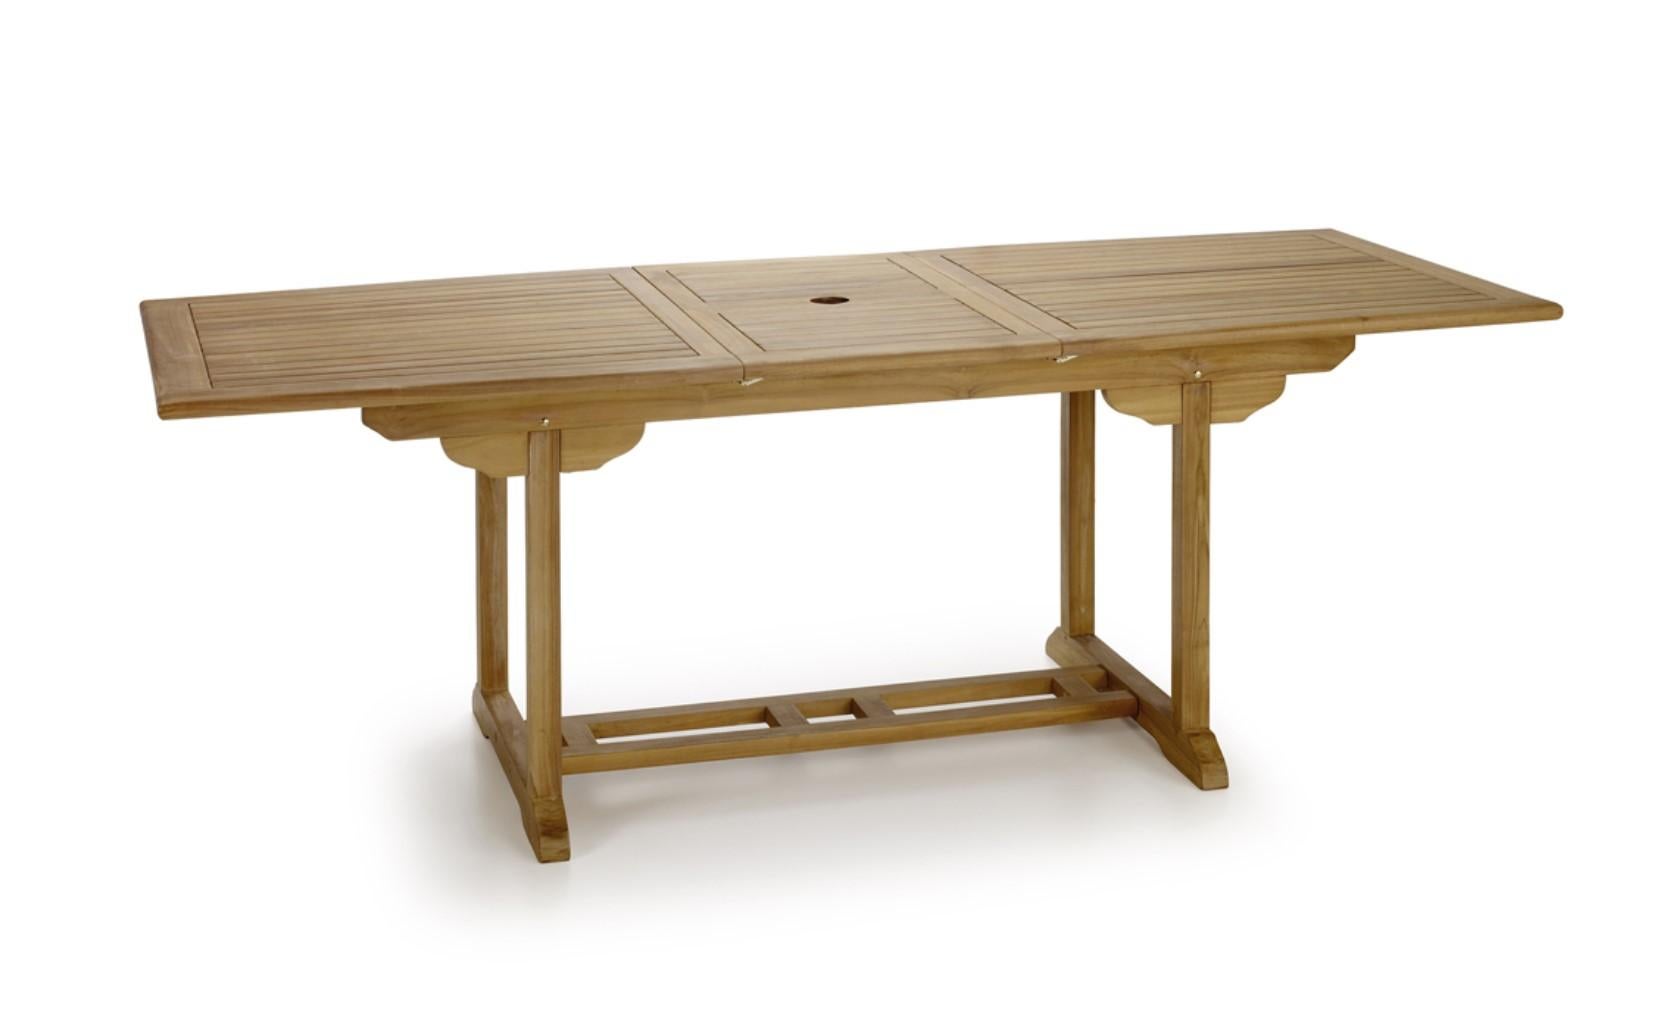 New teak rectangular foldable dIning table, indoor and outdoor

Extendable: 66.92in-86.61in.